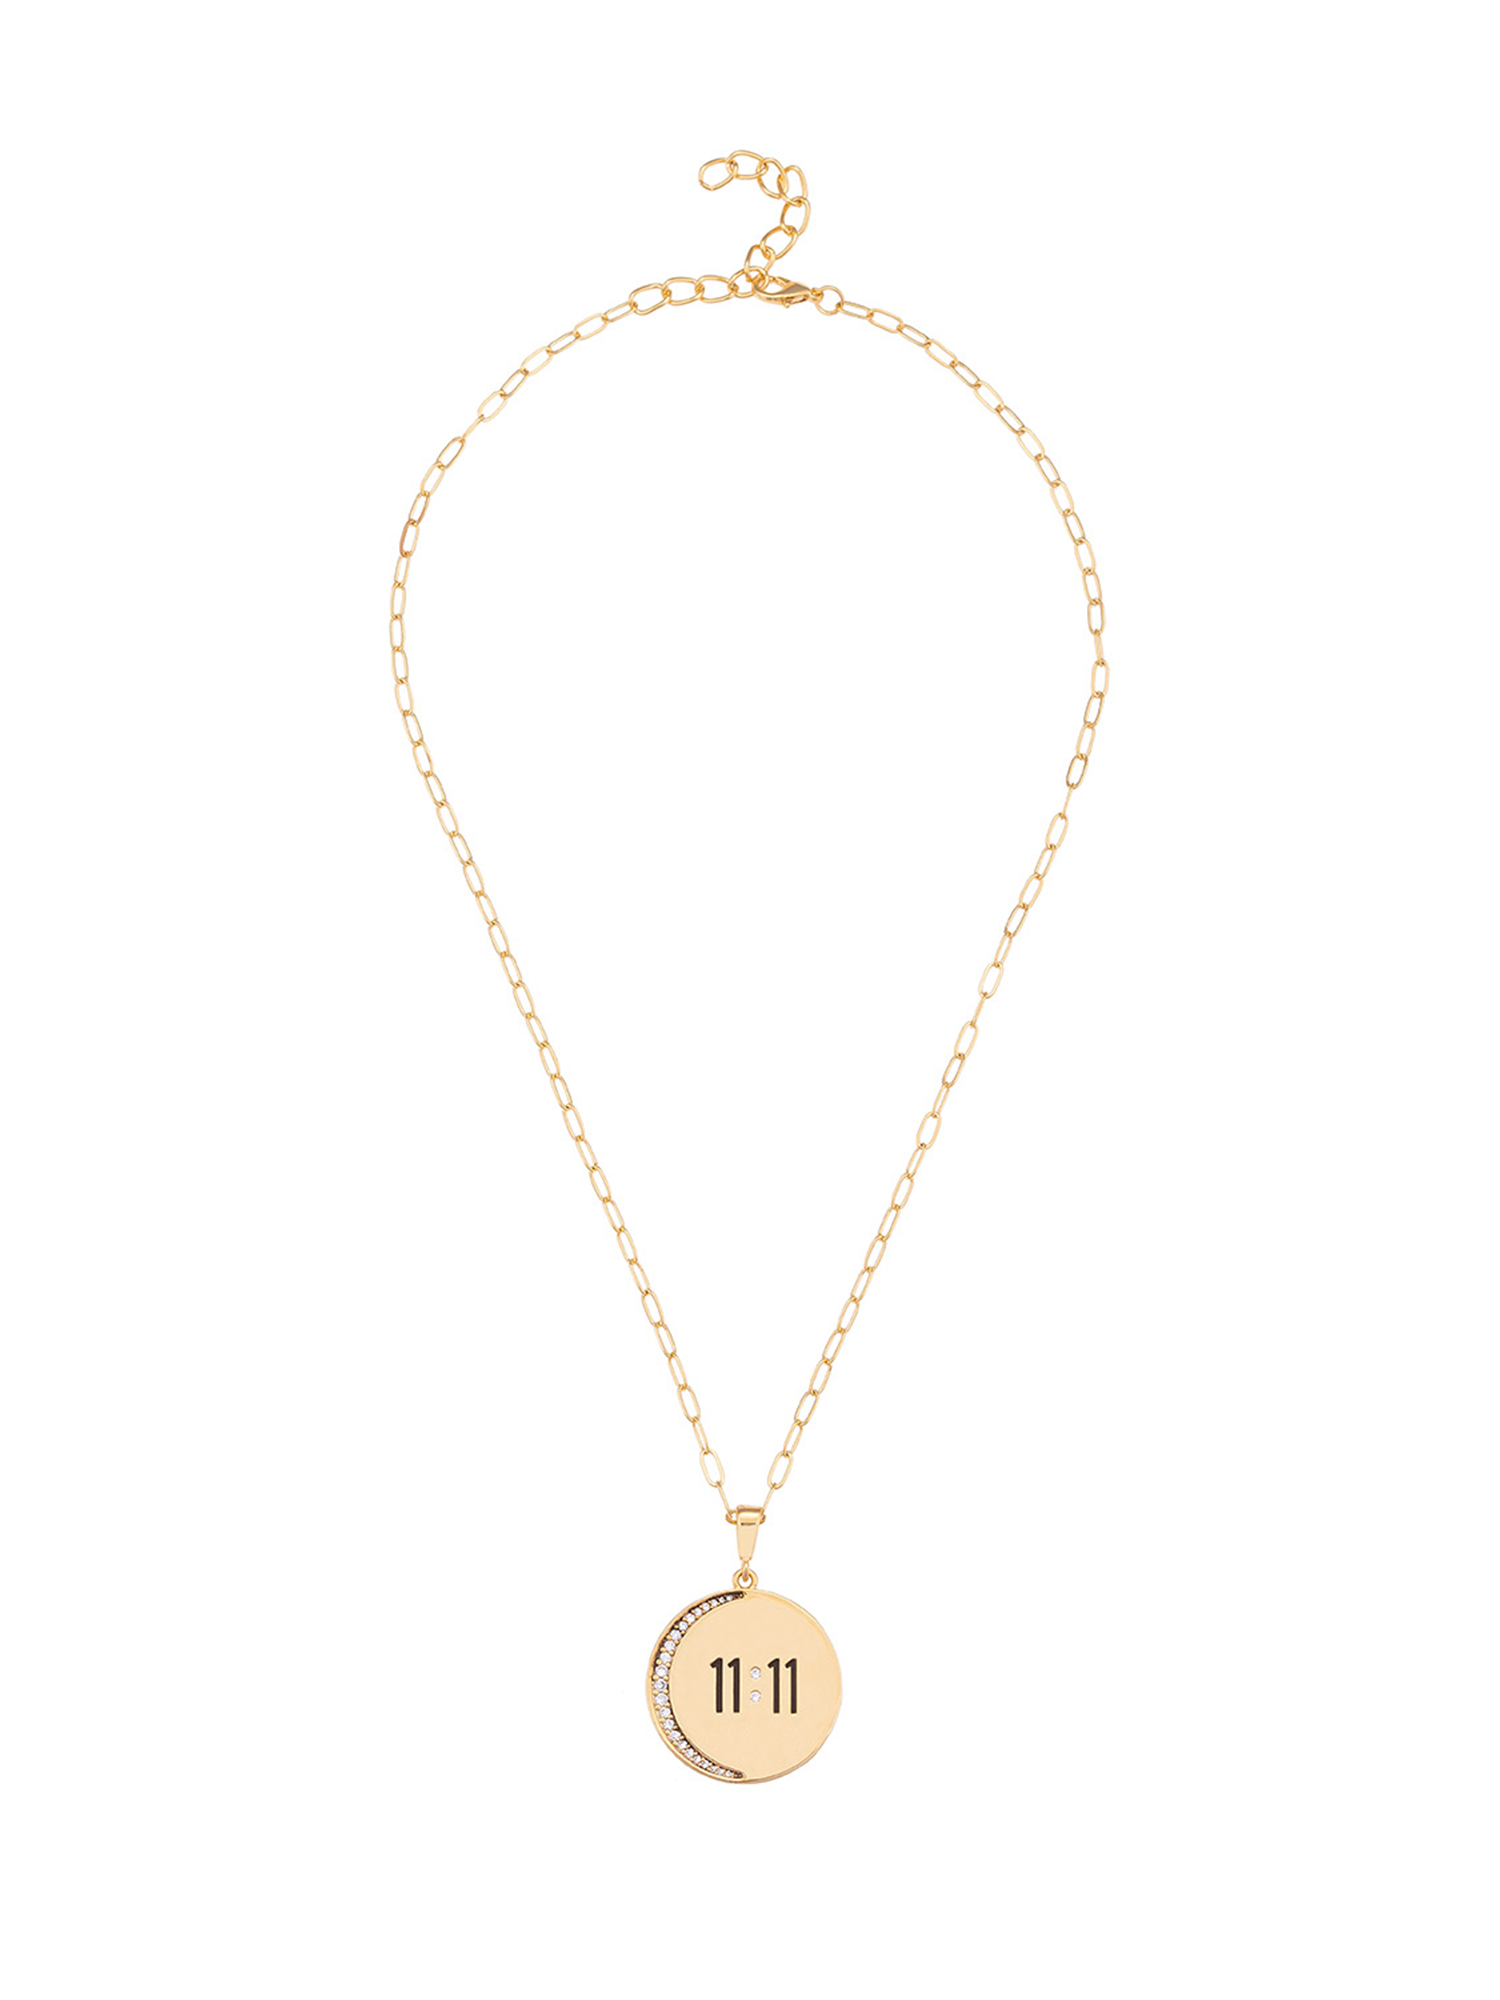 LUCKY ELEVEN NECKLACE GOLD